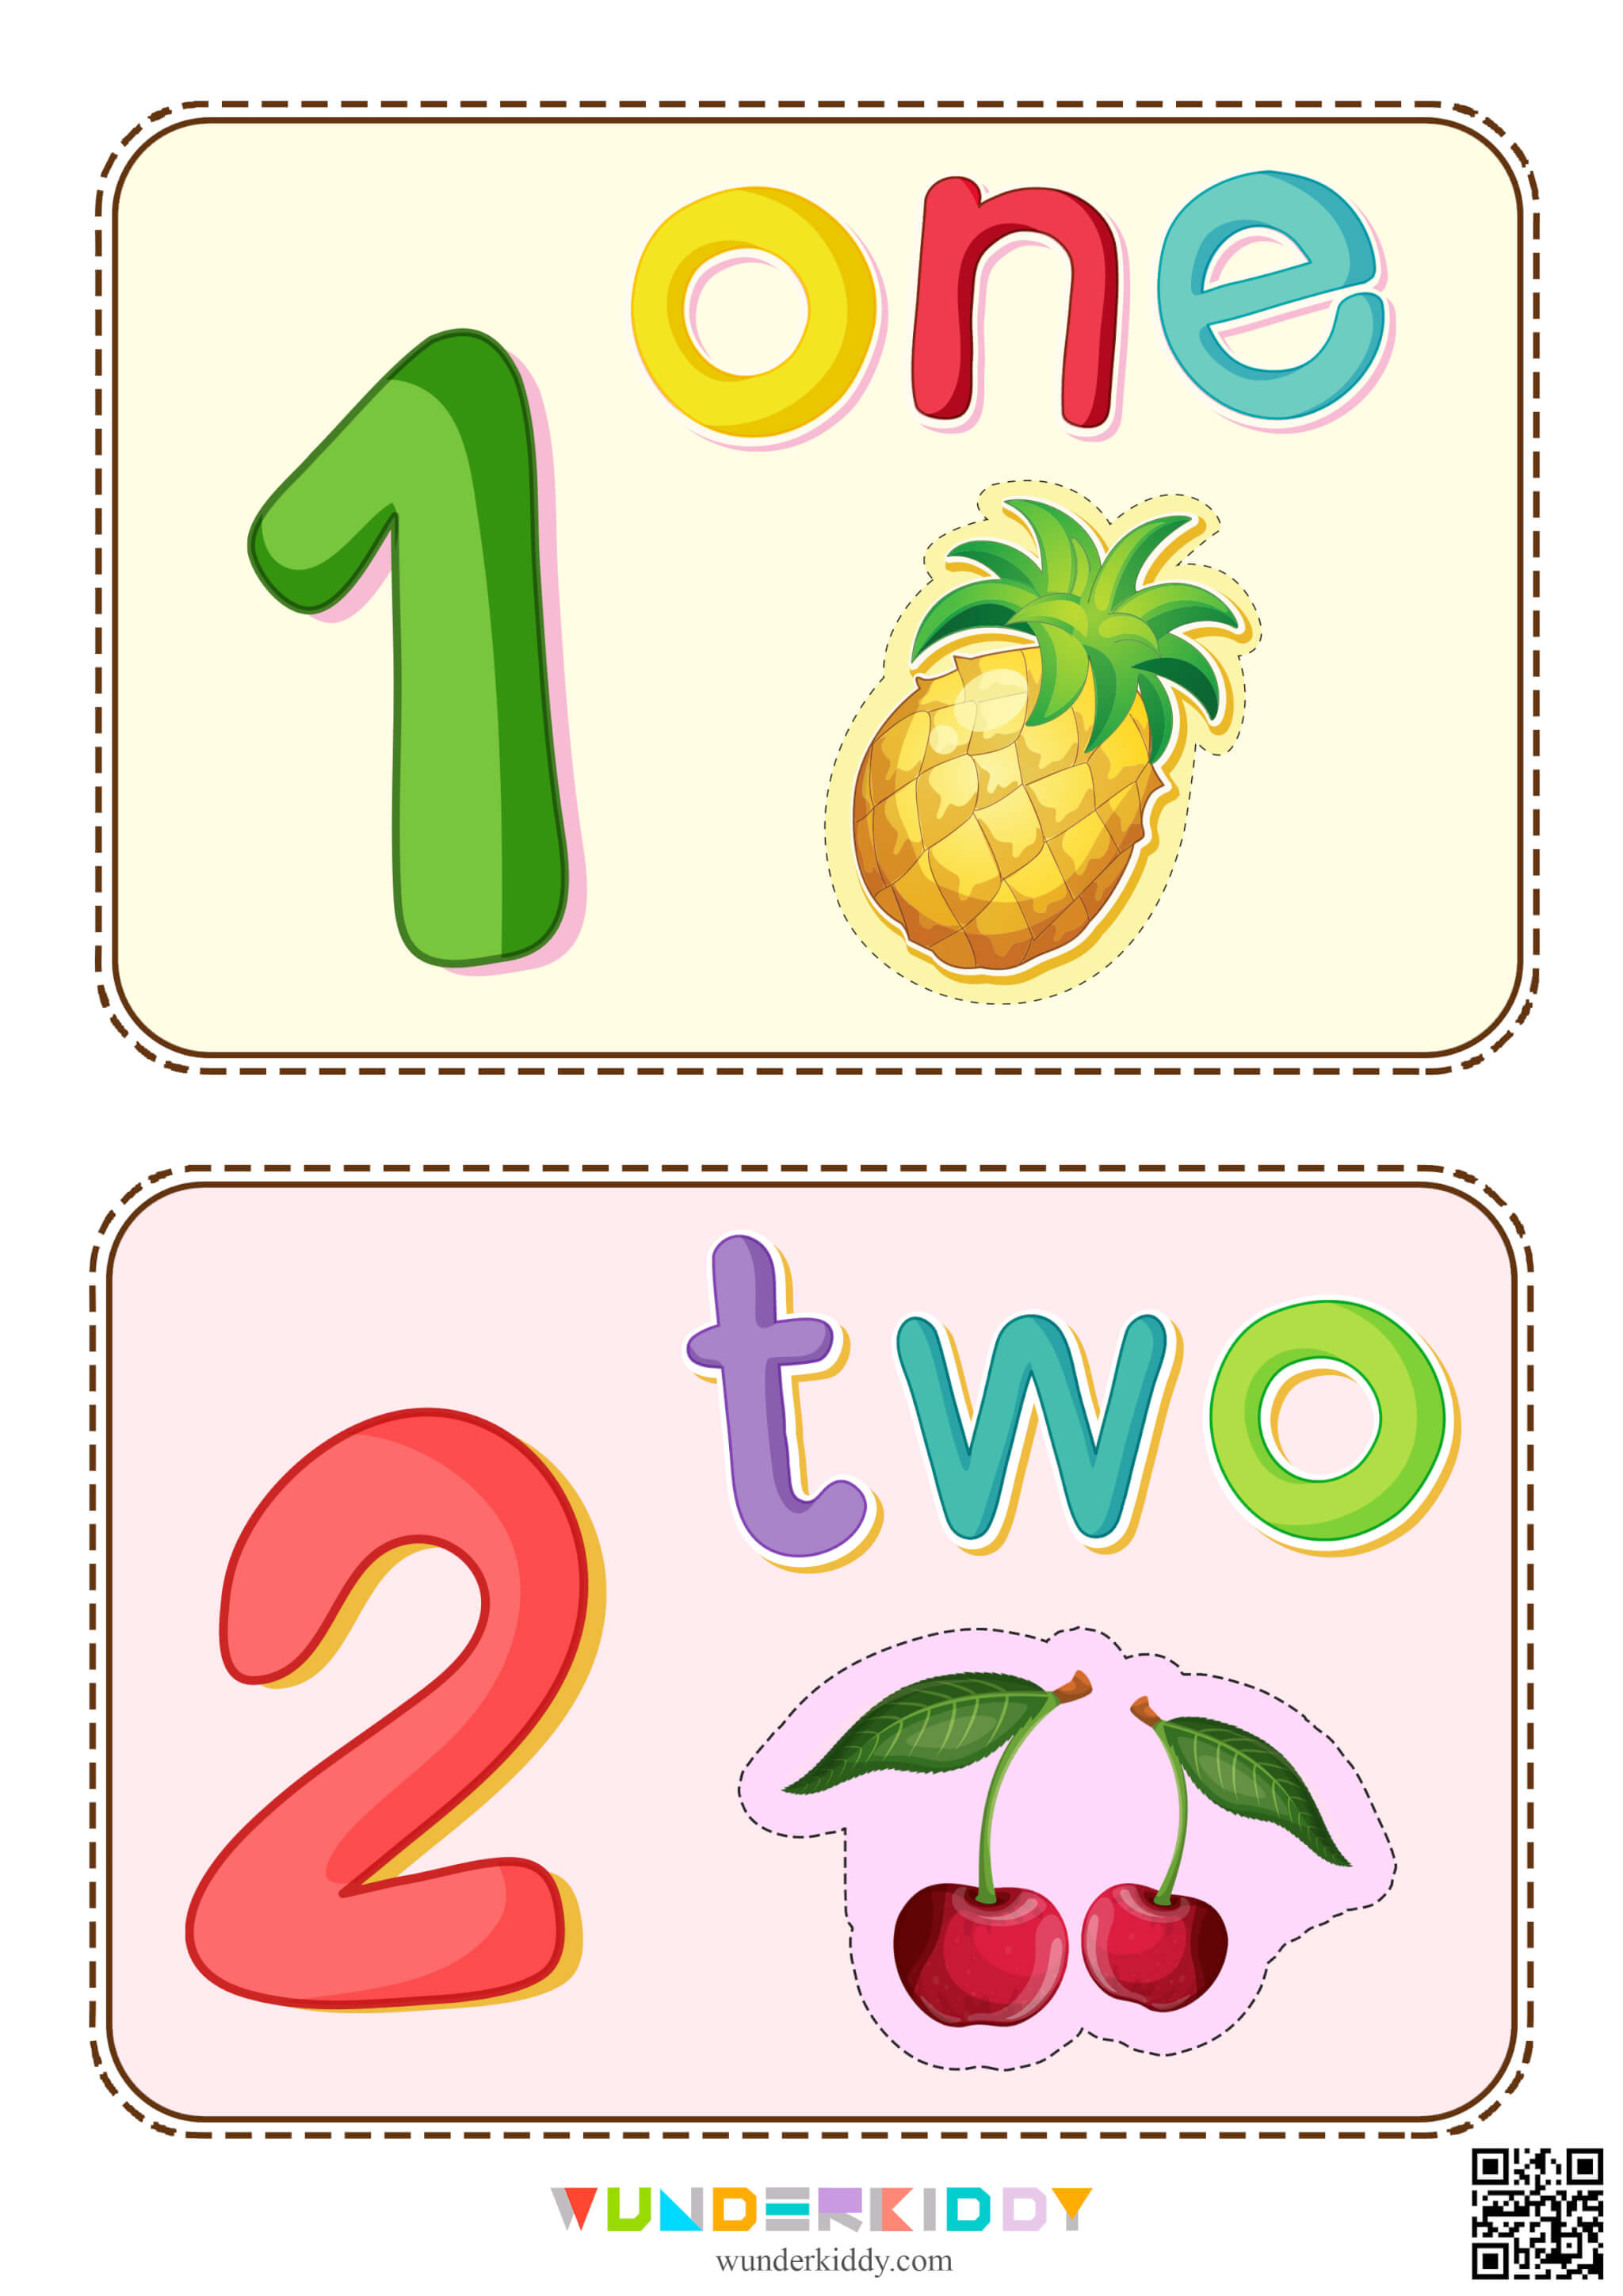 Illustrated Number Flashcards - Image 2